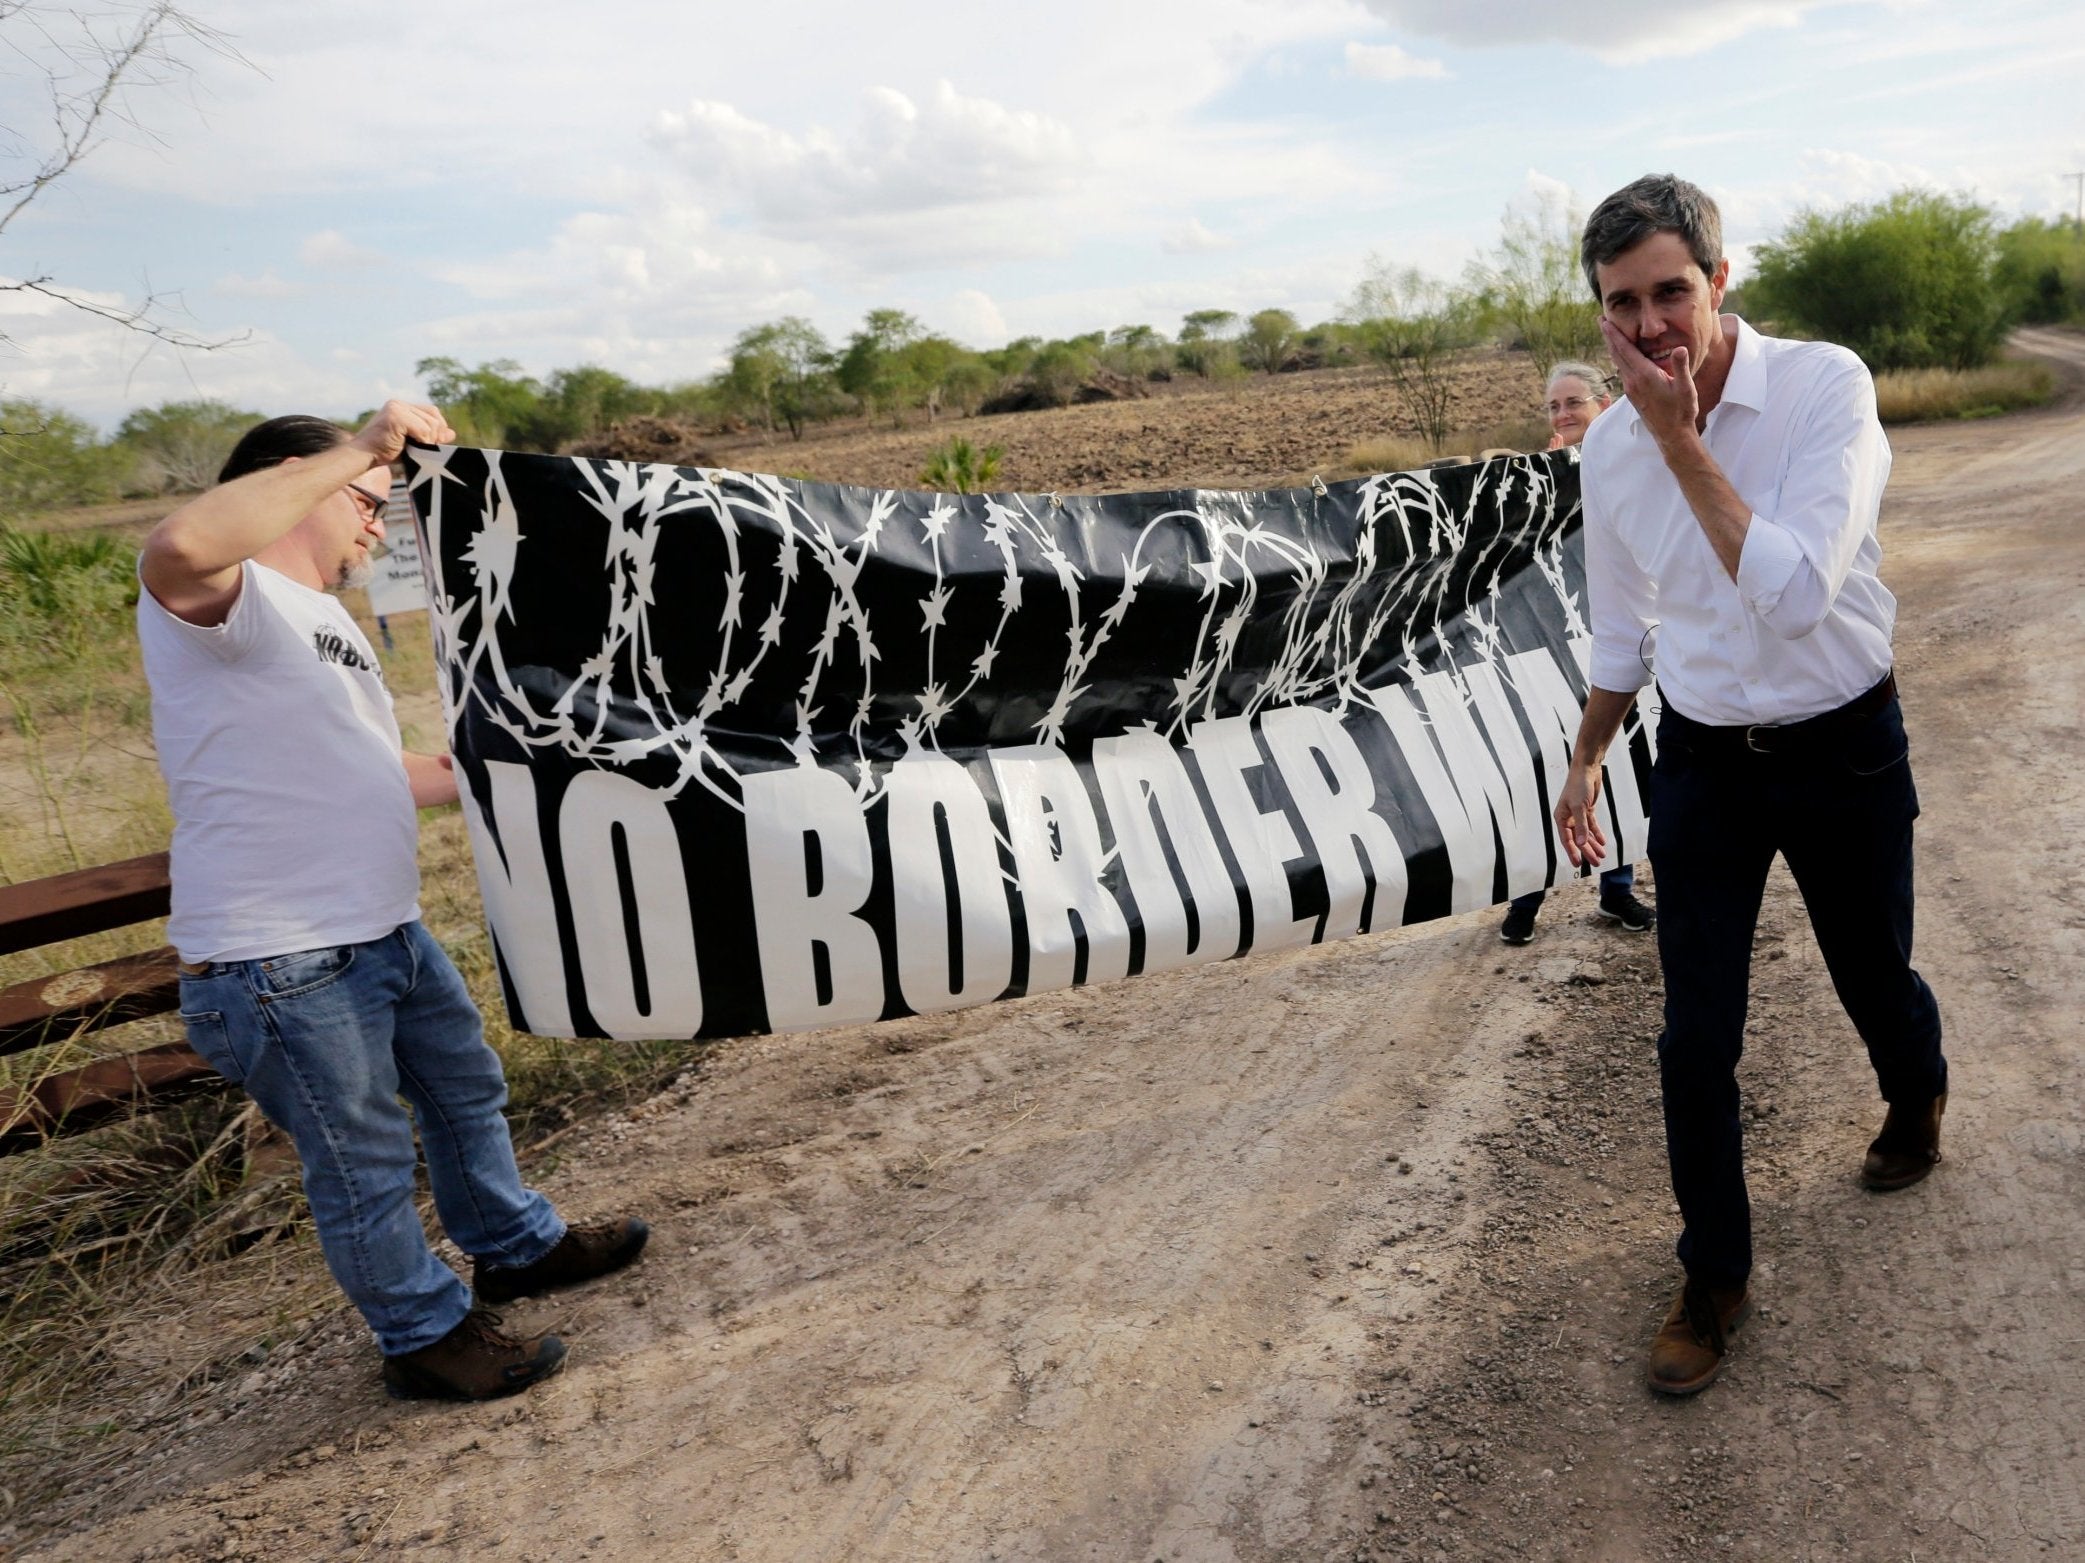 Texas Democratic Congressman Beto O'Rourke, right, passes a "No Border Wall" sign during a visit to the National Butterfly Center in Mission, Texas